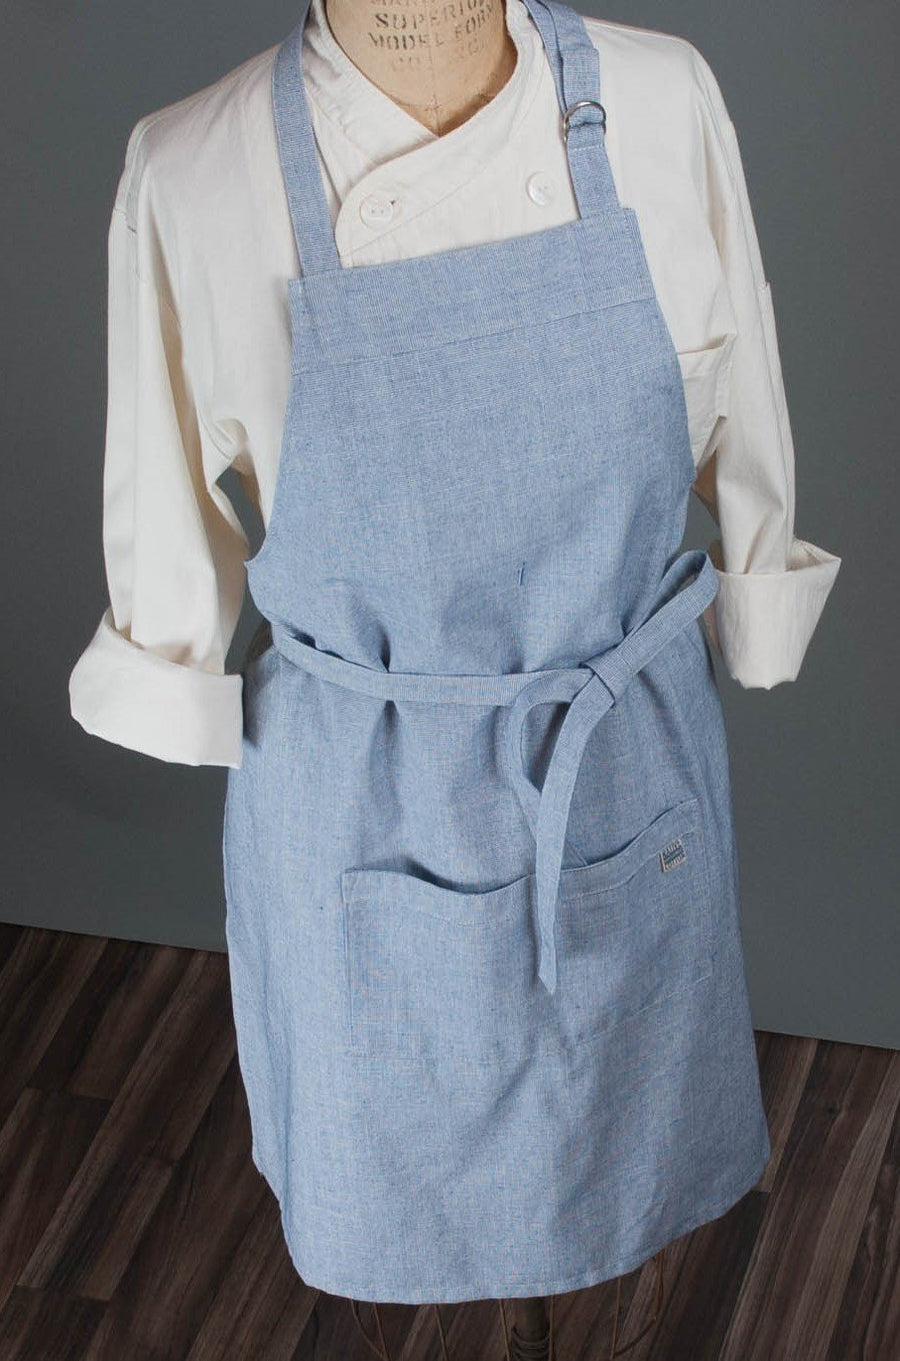 Aprons - Solid Heather